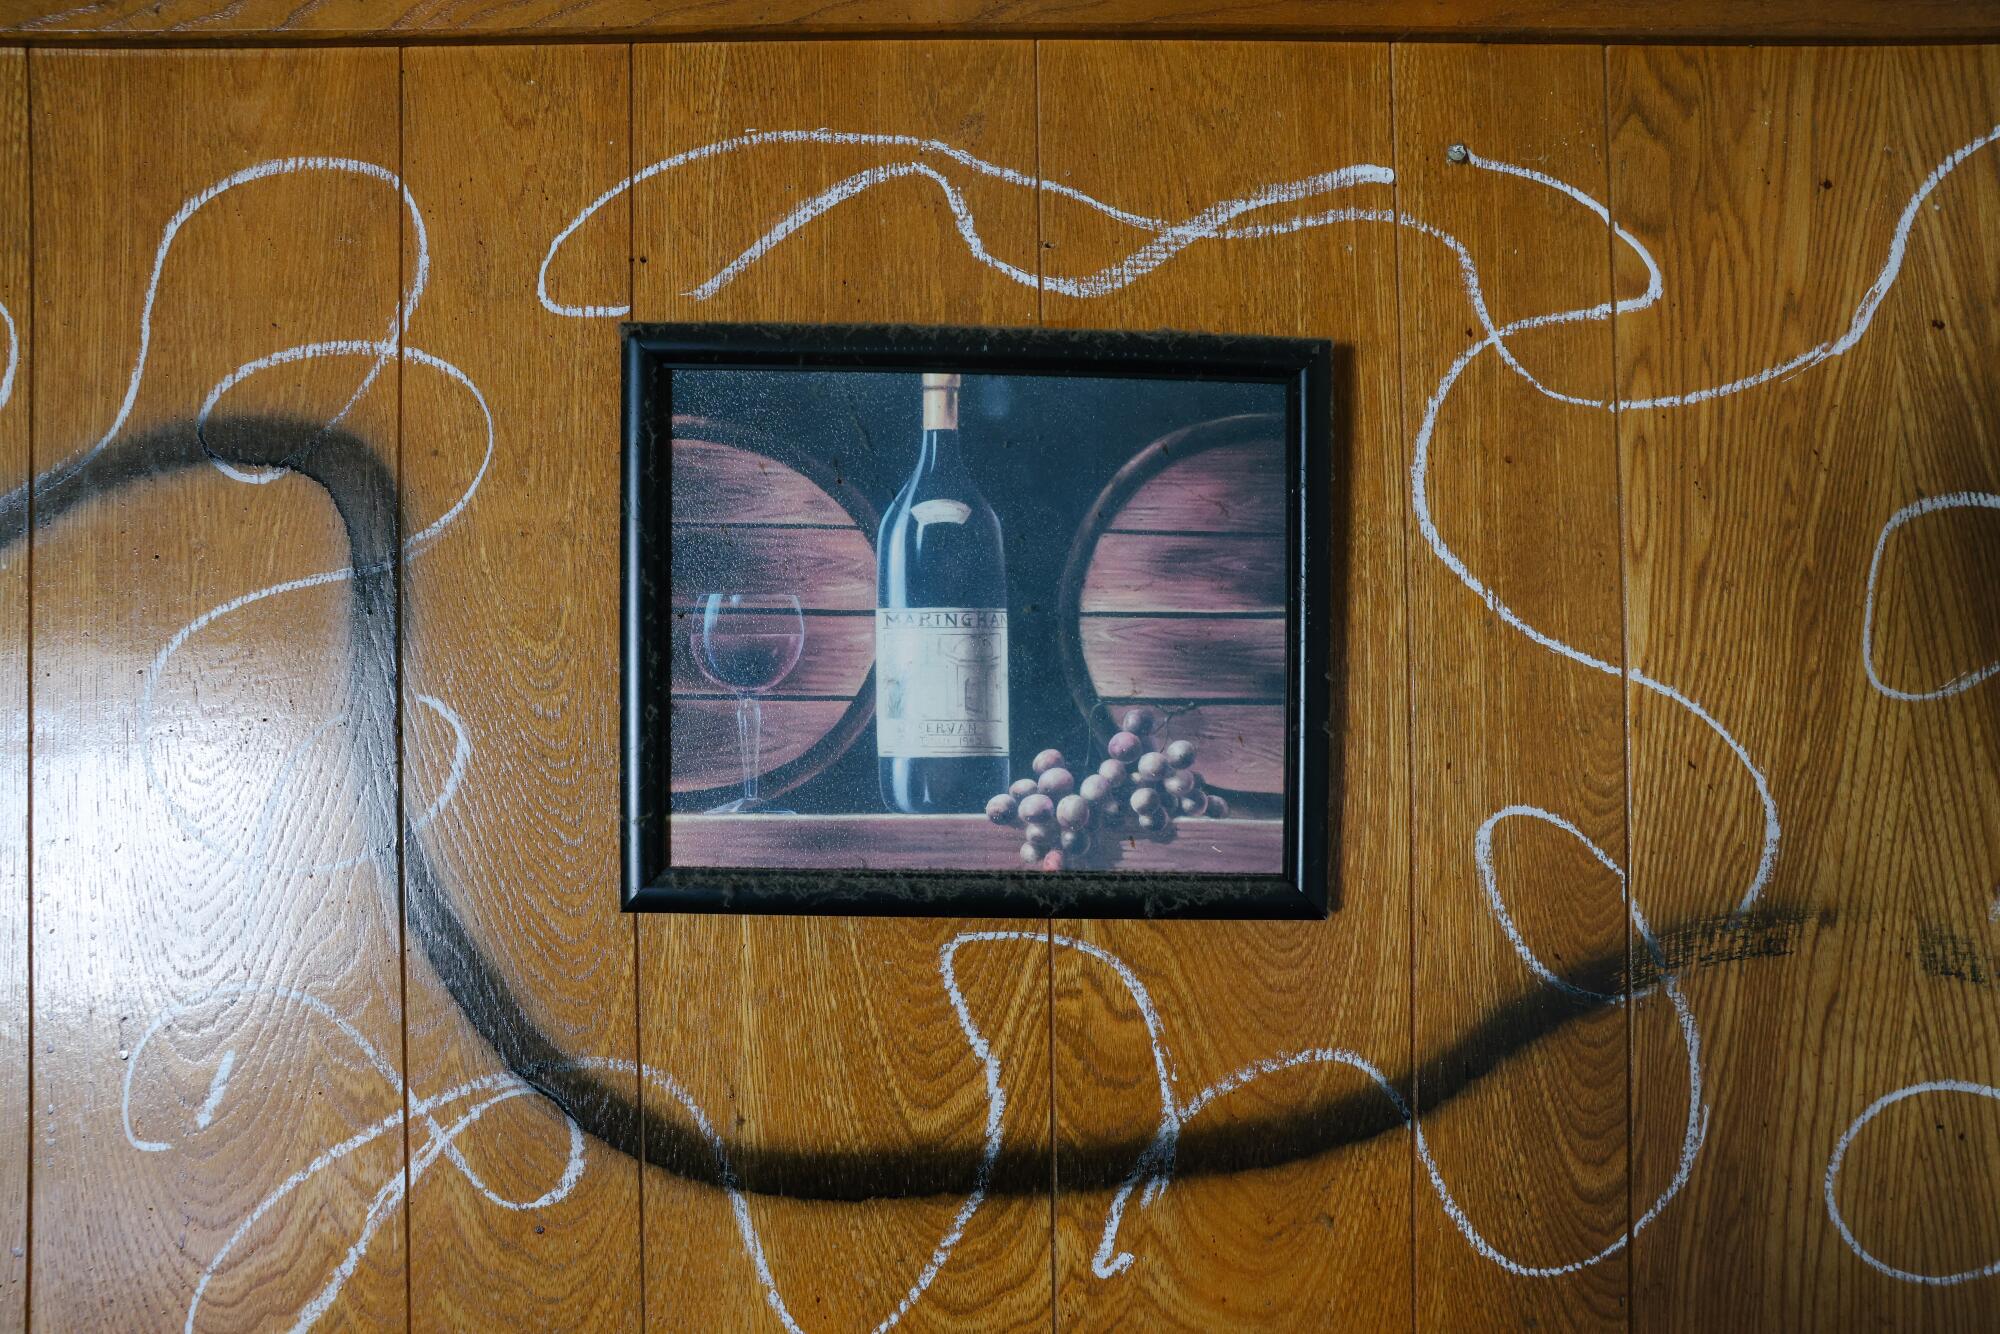 White swirls and a curved black line drawn on a wood-paneled wall next to framed art of a wine bottle, barrels and grapes